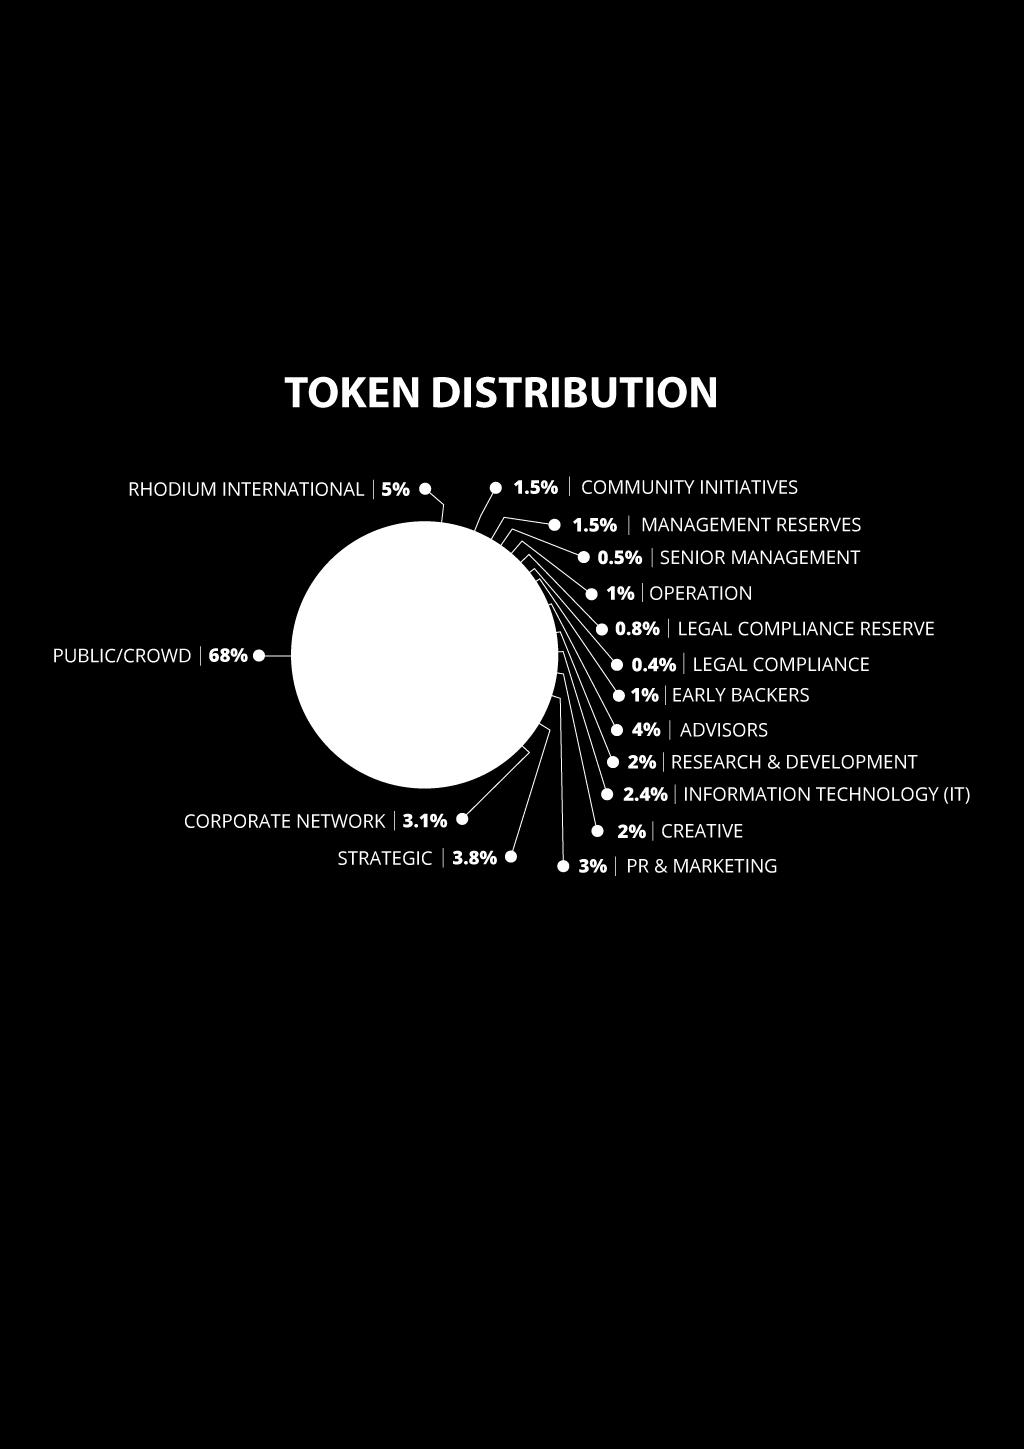 3.0 TOKEN DISTRIBUTION The Rhypton Tokens are generated by the Ethereum Smart Contract ERC20. The Smart Contract is set-up by Rhypton. The number of Rhypton Tokens is capped at 2.7 billion.